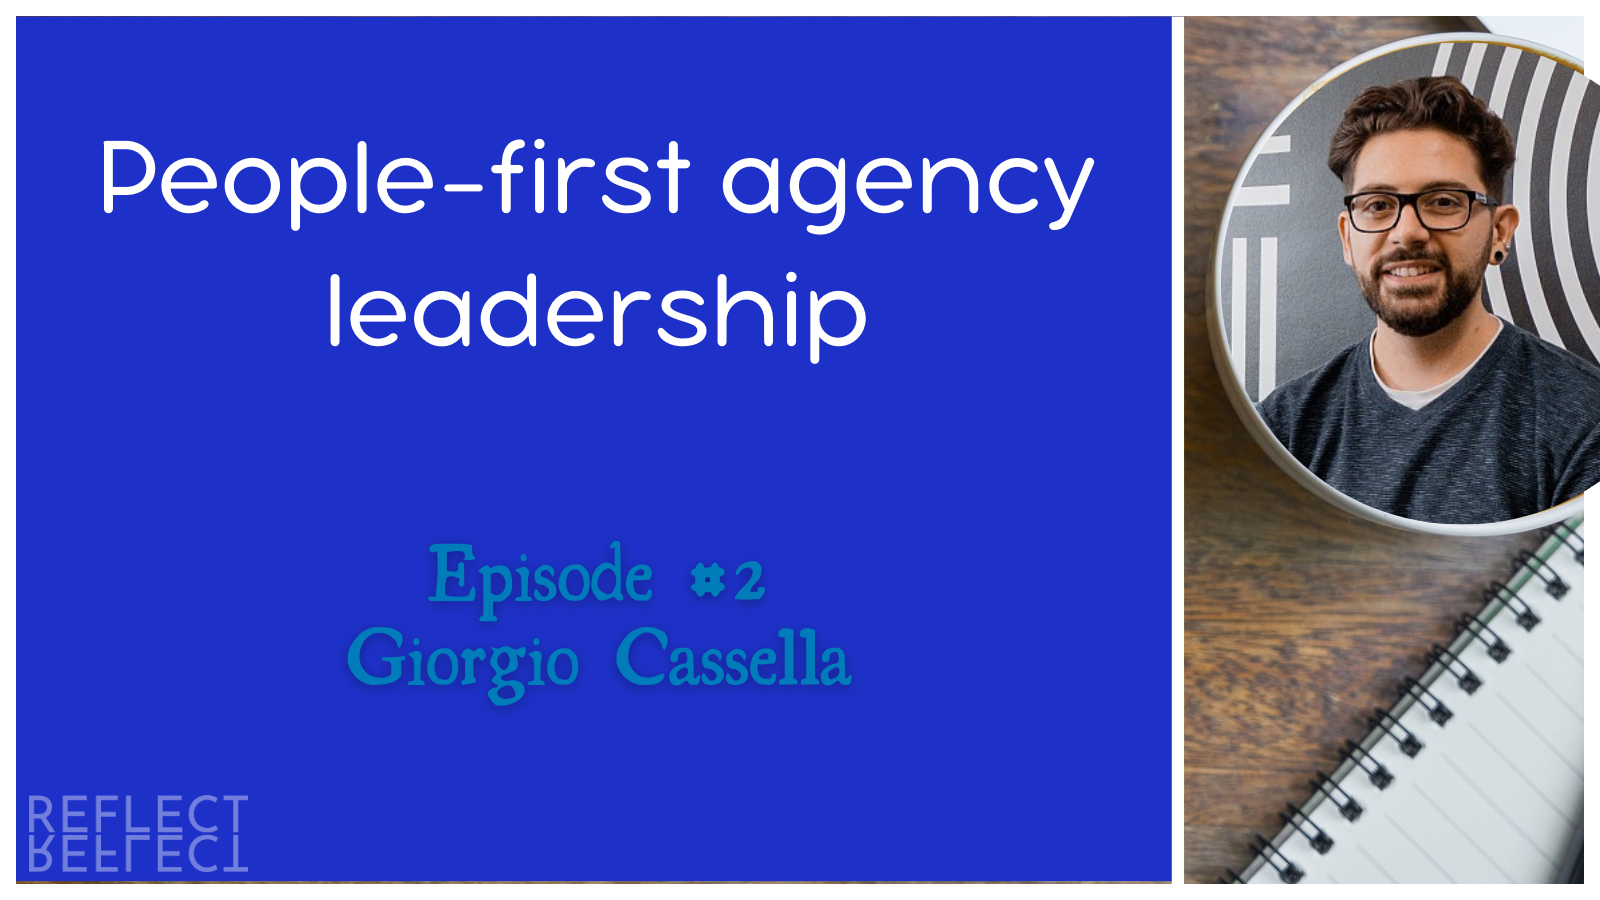 Reflections Podcast #2 – People-first agency leadership with Giorgio Cassella